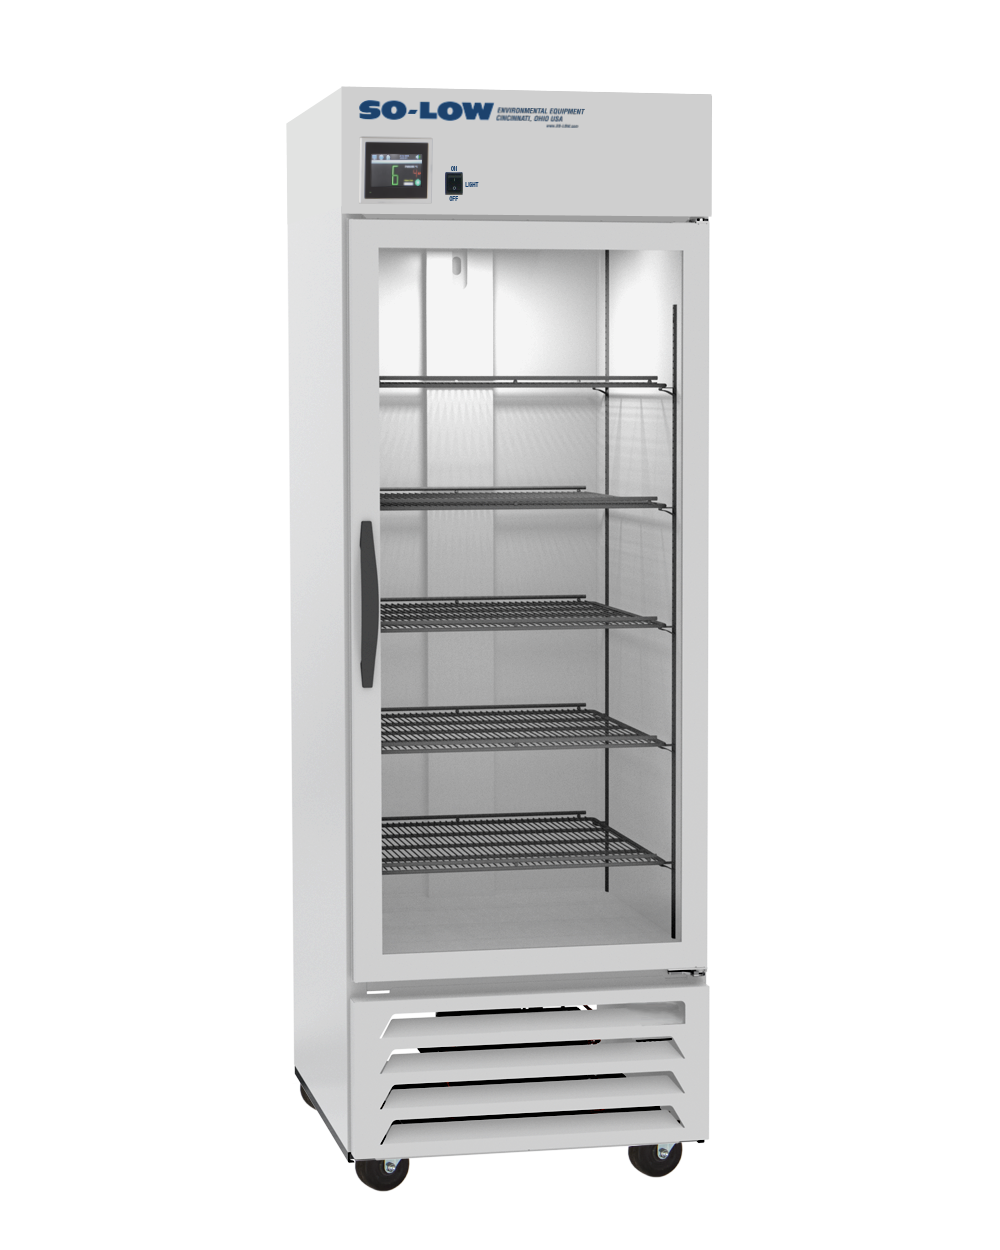 So-Low 2ºC to 8ºC, 23 cu.ft., single glass door, Cycle Defrost, 115v